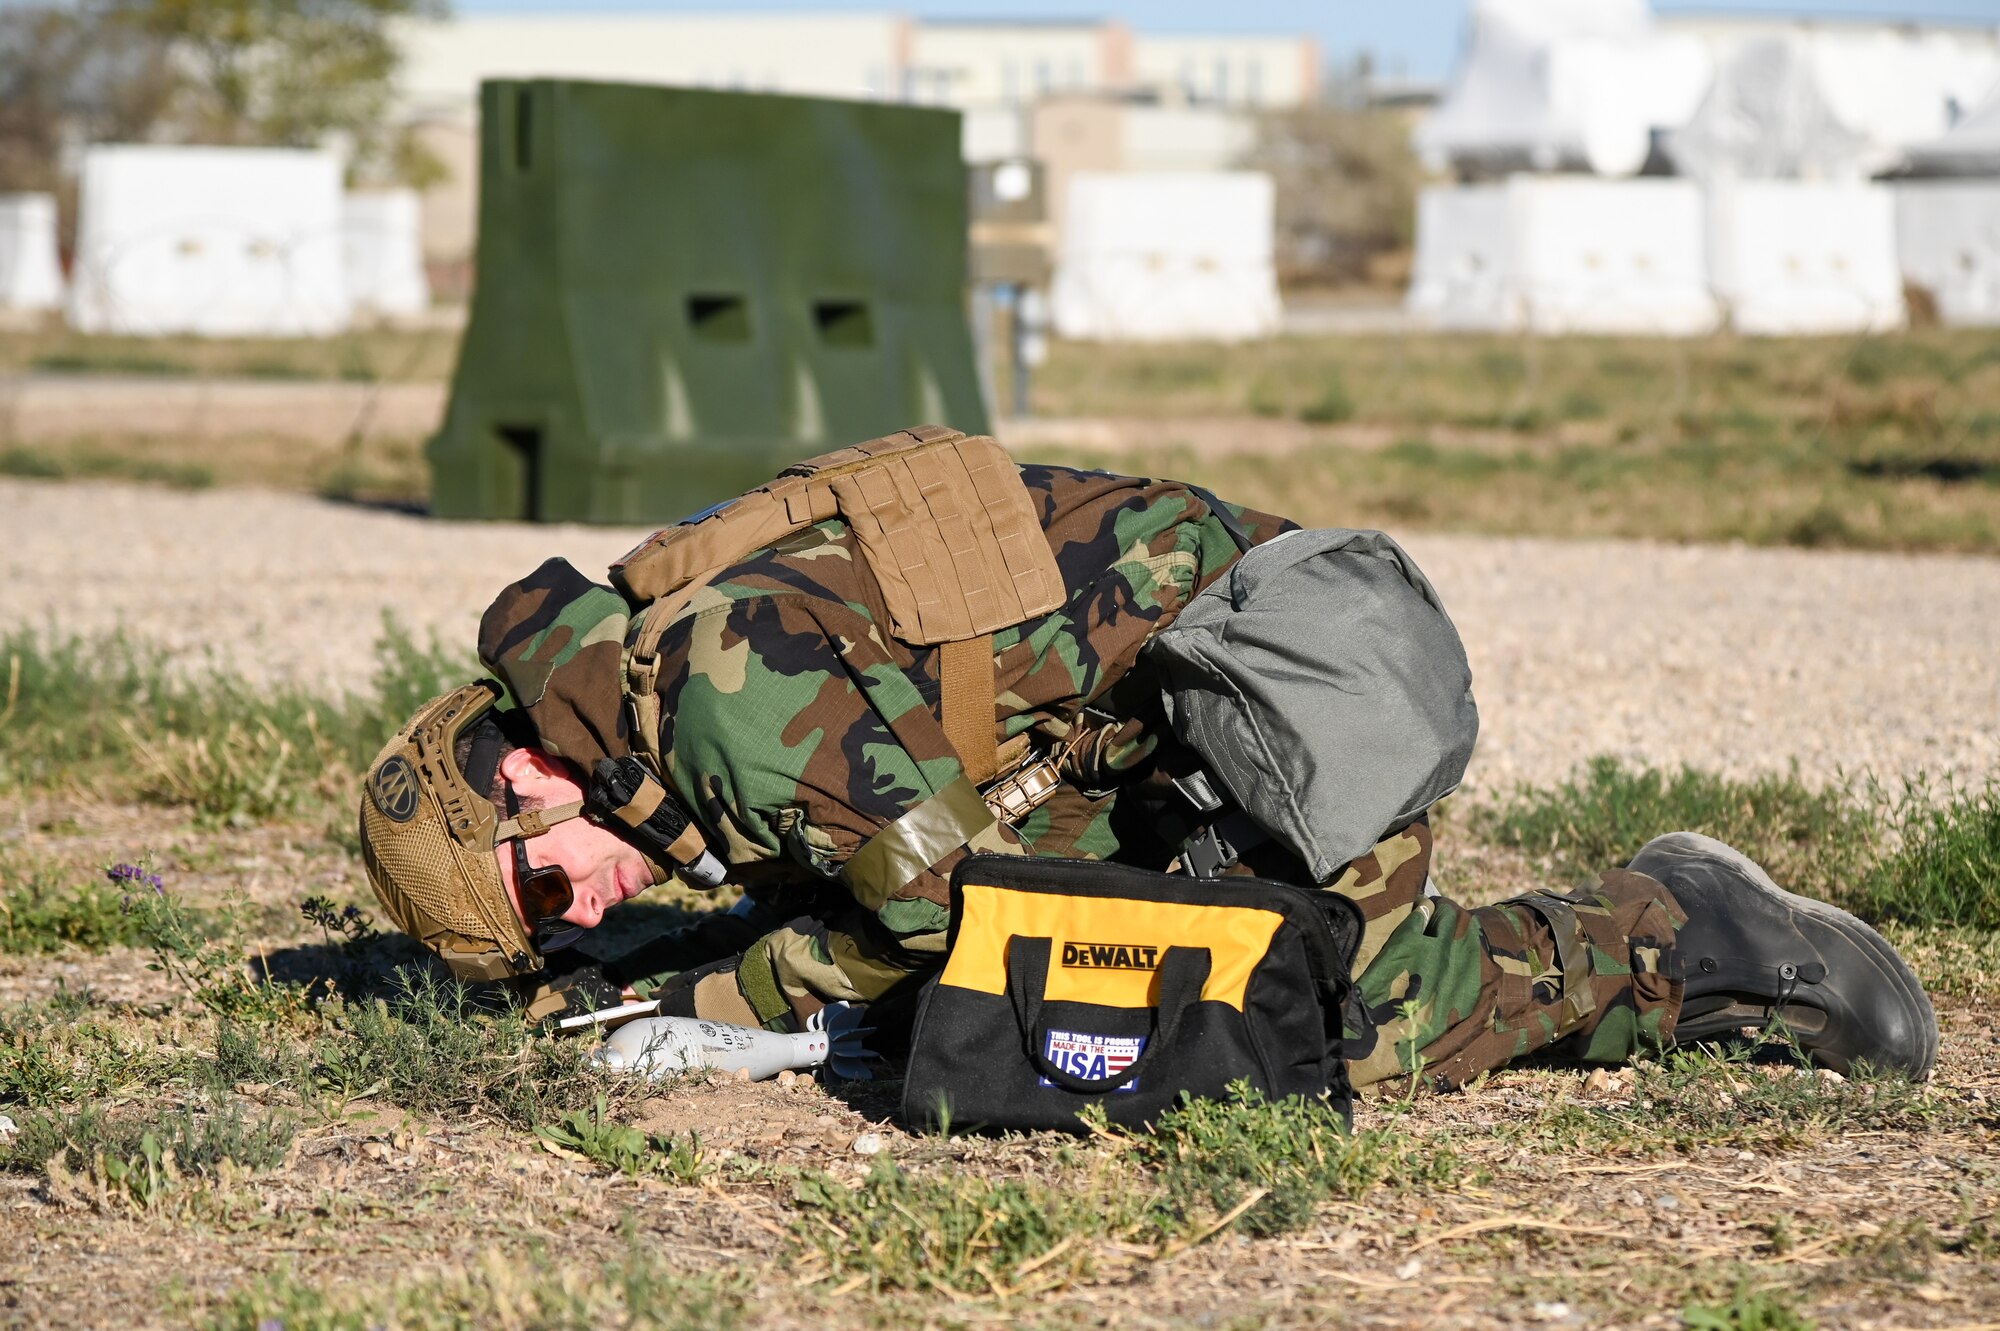 Staff Sgt. Kaleb Marquis, 775th Explosive Ordnance Disposal Flight, inspects mock ordnance Sept. 22, 2021, at Hill Air Force Base, Utah. Squadrons from the 75th Air Base Wing participated in a phase II readiness exercise where they were assessed on performing tasks in an austere environment. (U.S. Air Force photo by Cynthia Griggs)